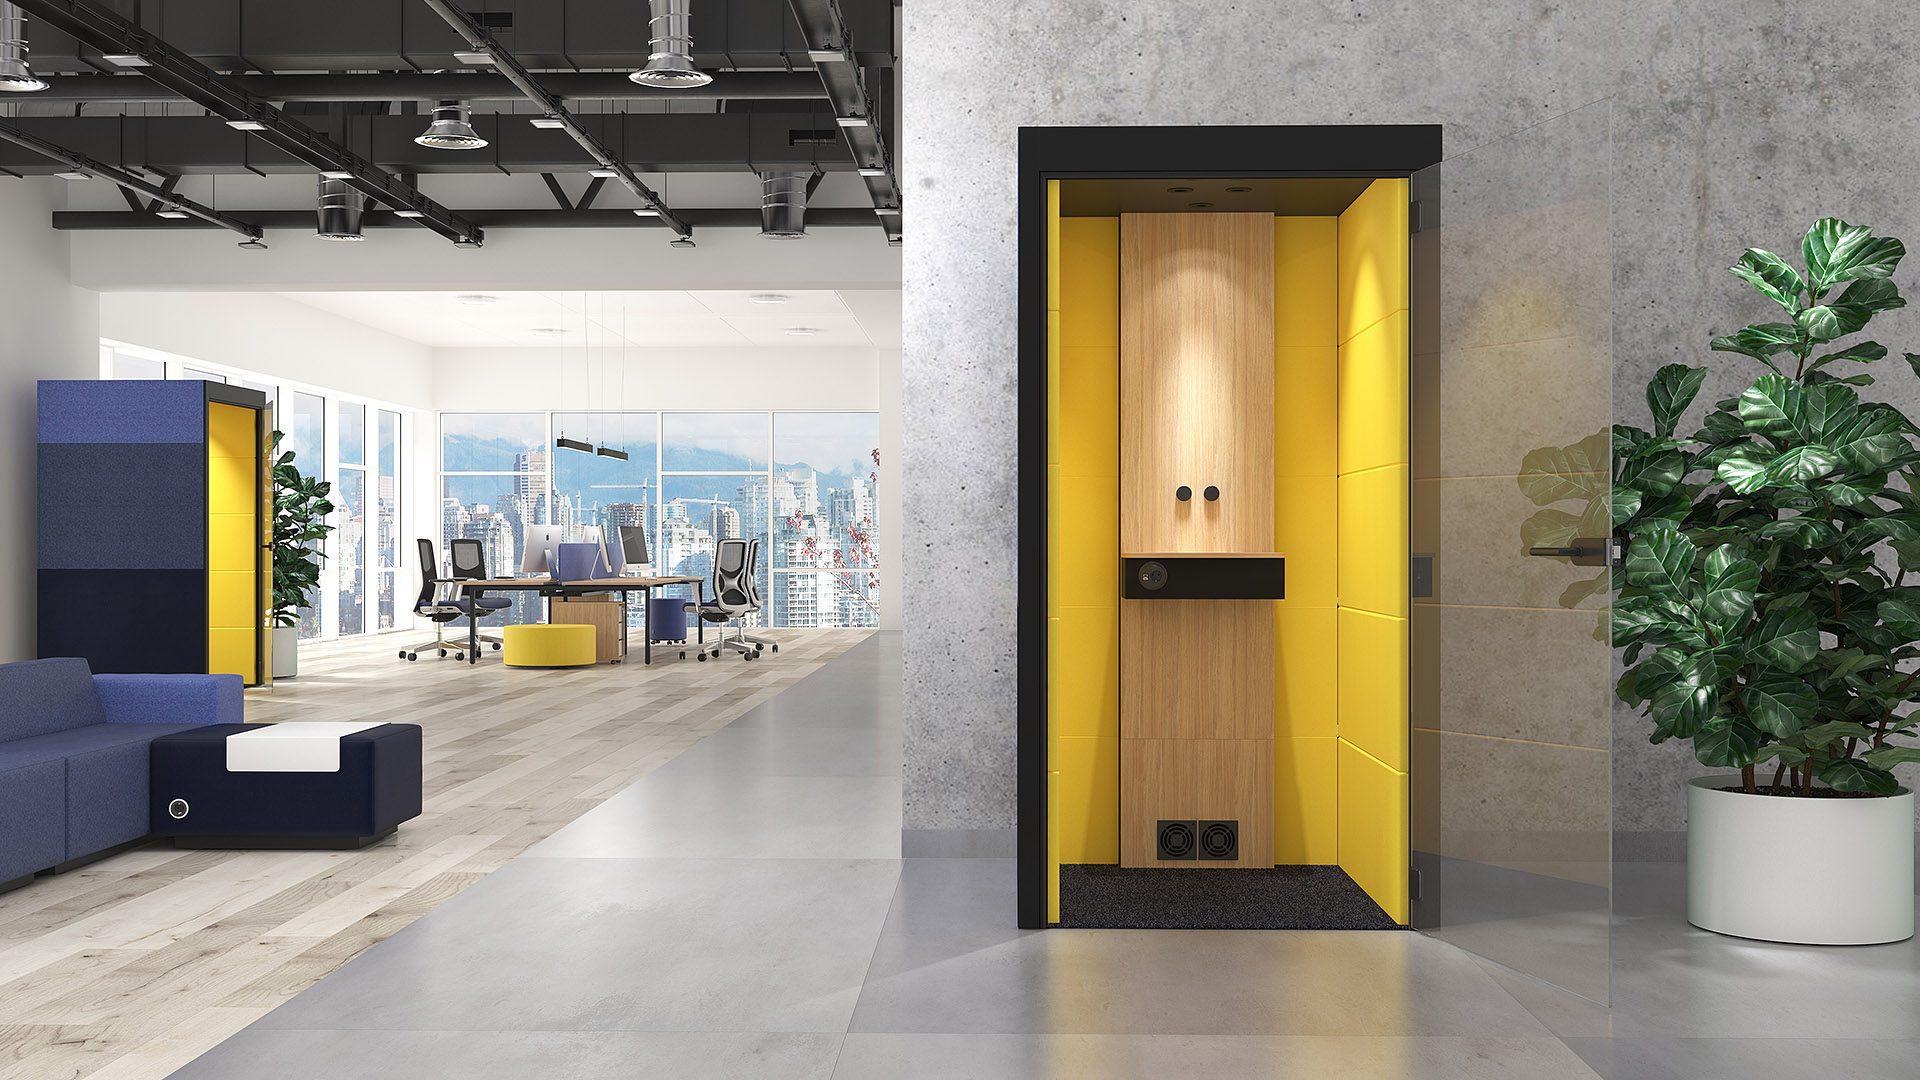 Small Silent Room ensures indoor air quality as well as acoustic and visual comfort for users